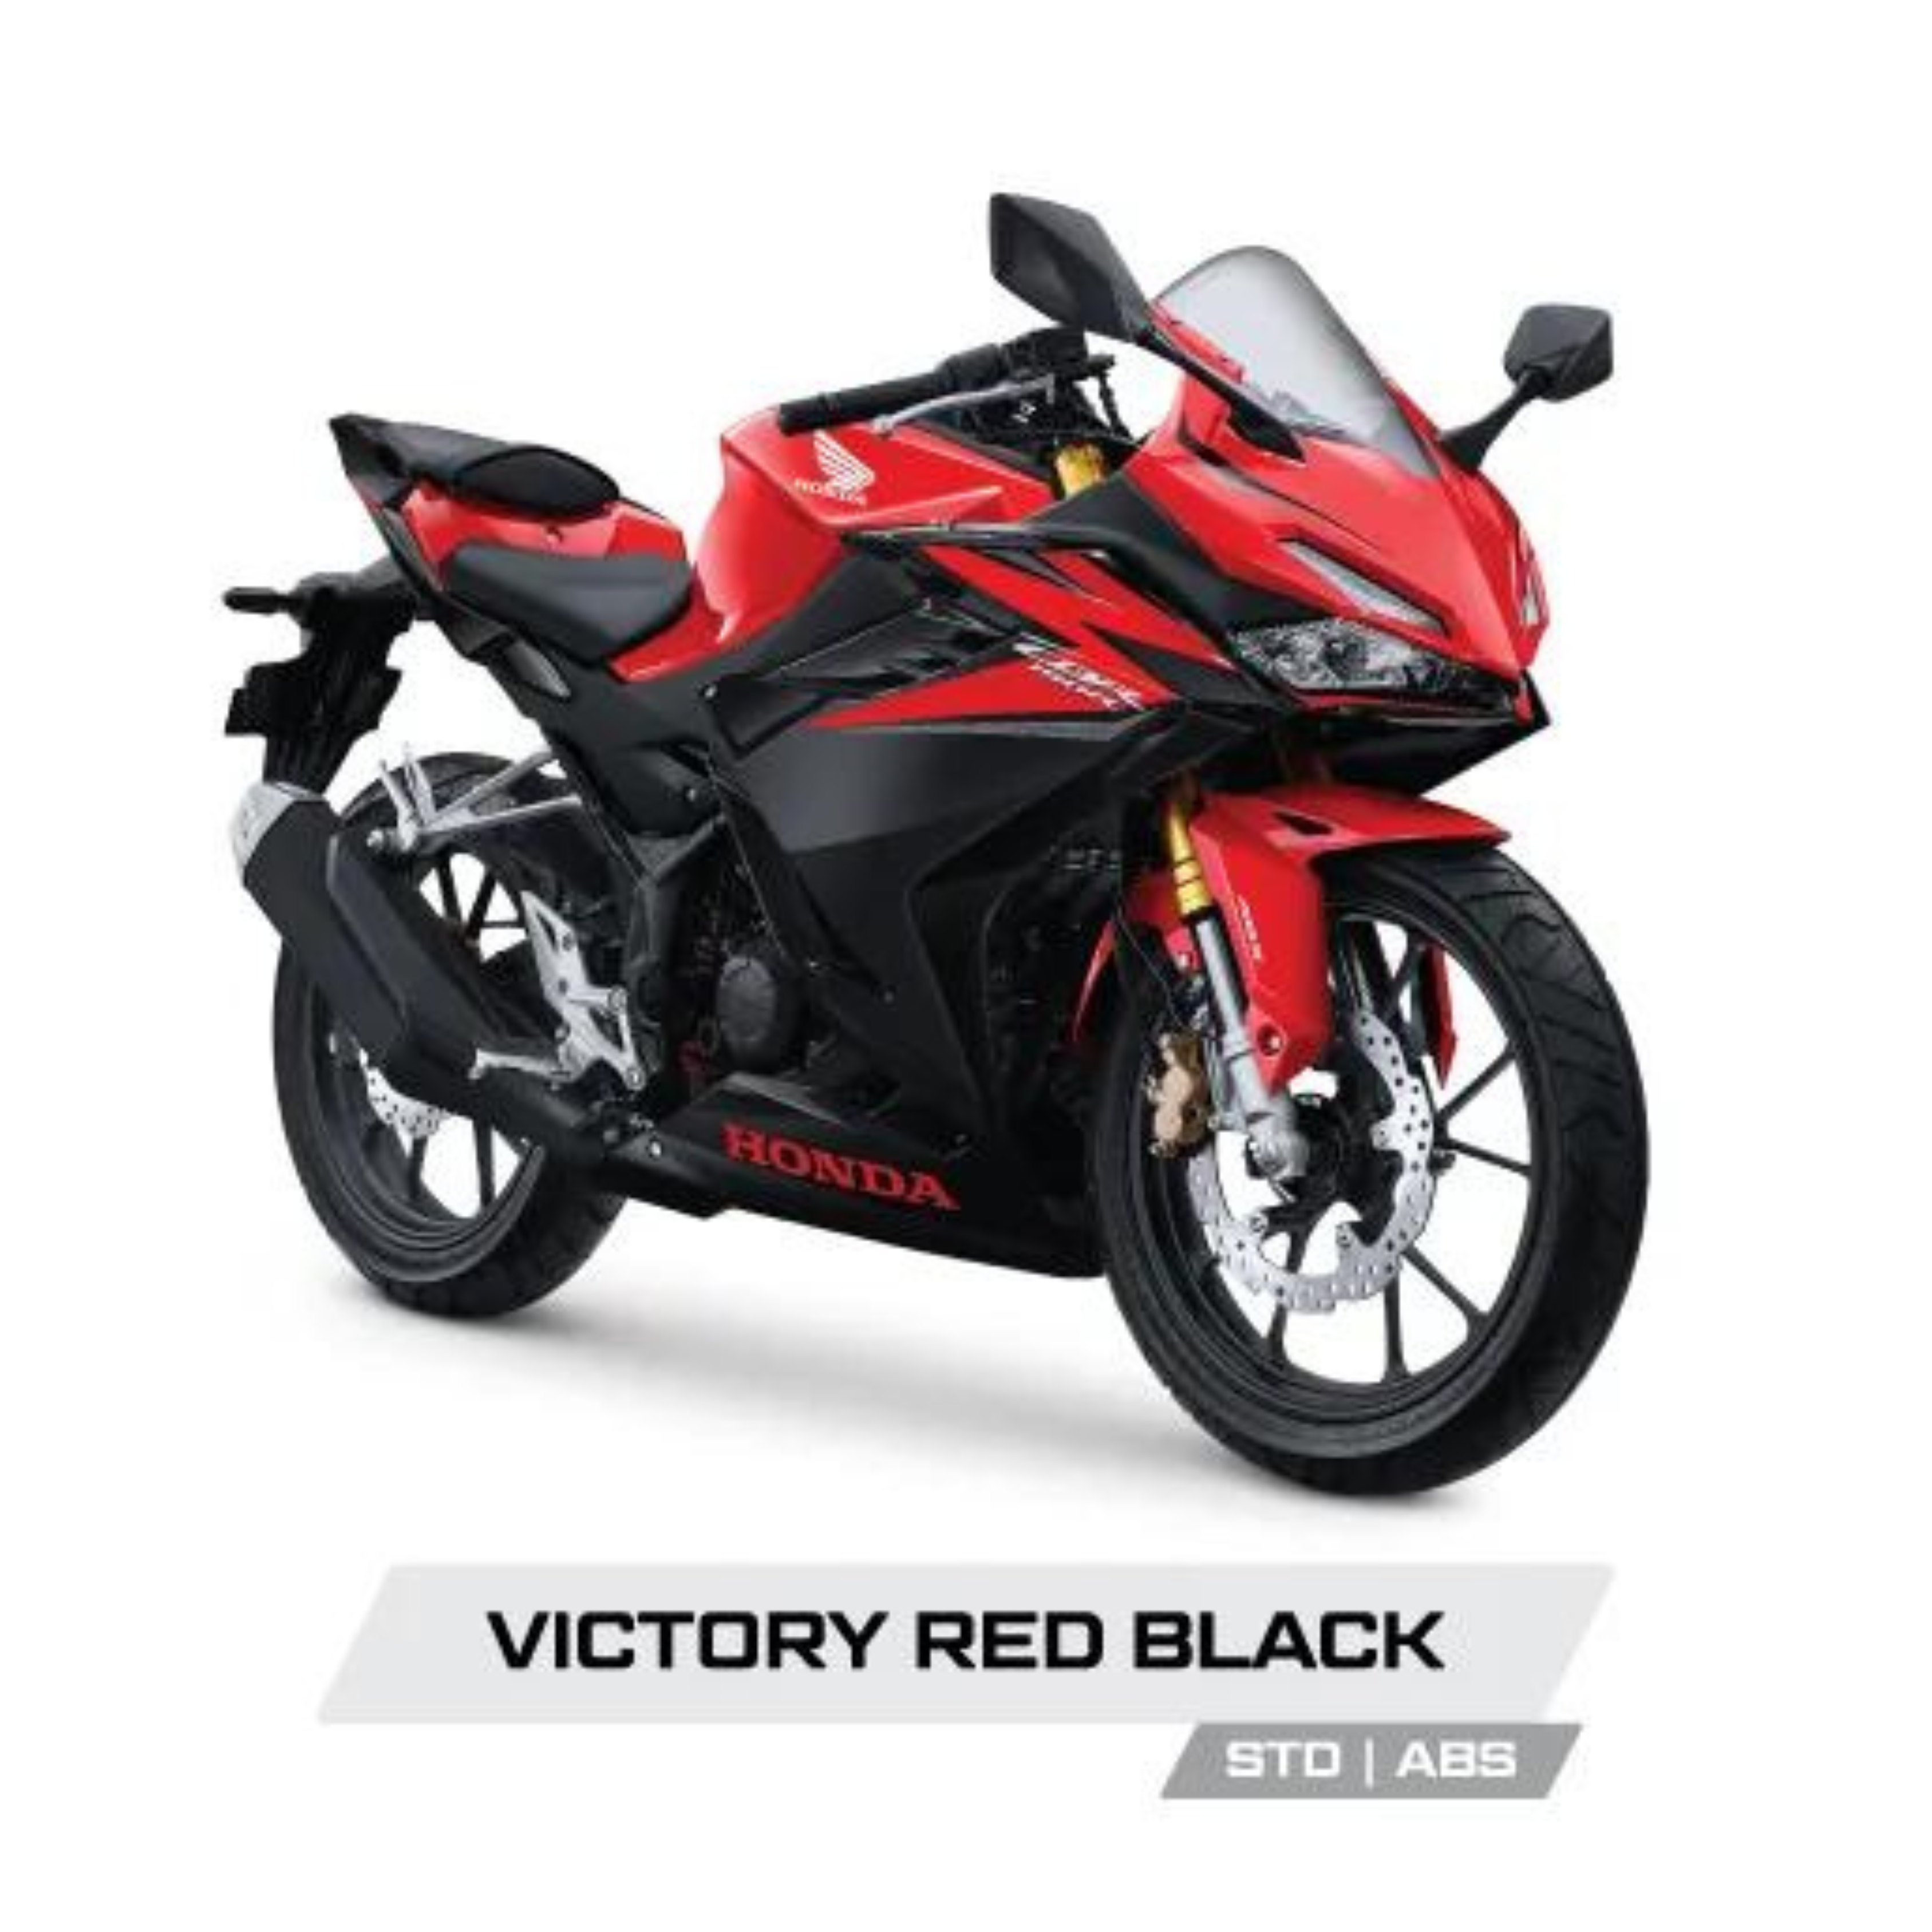 Victory Red Black